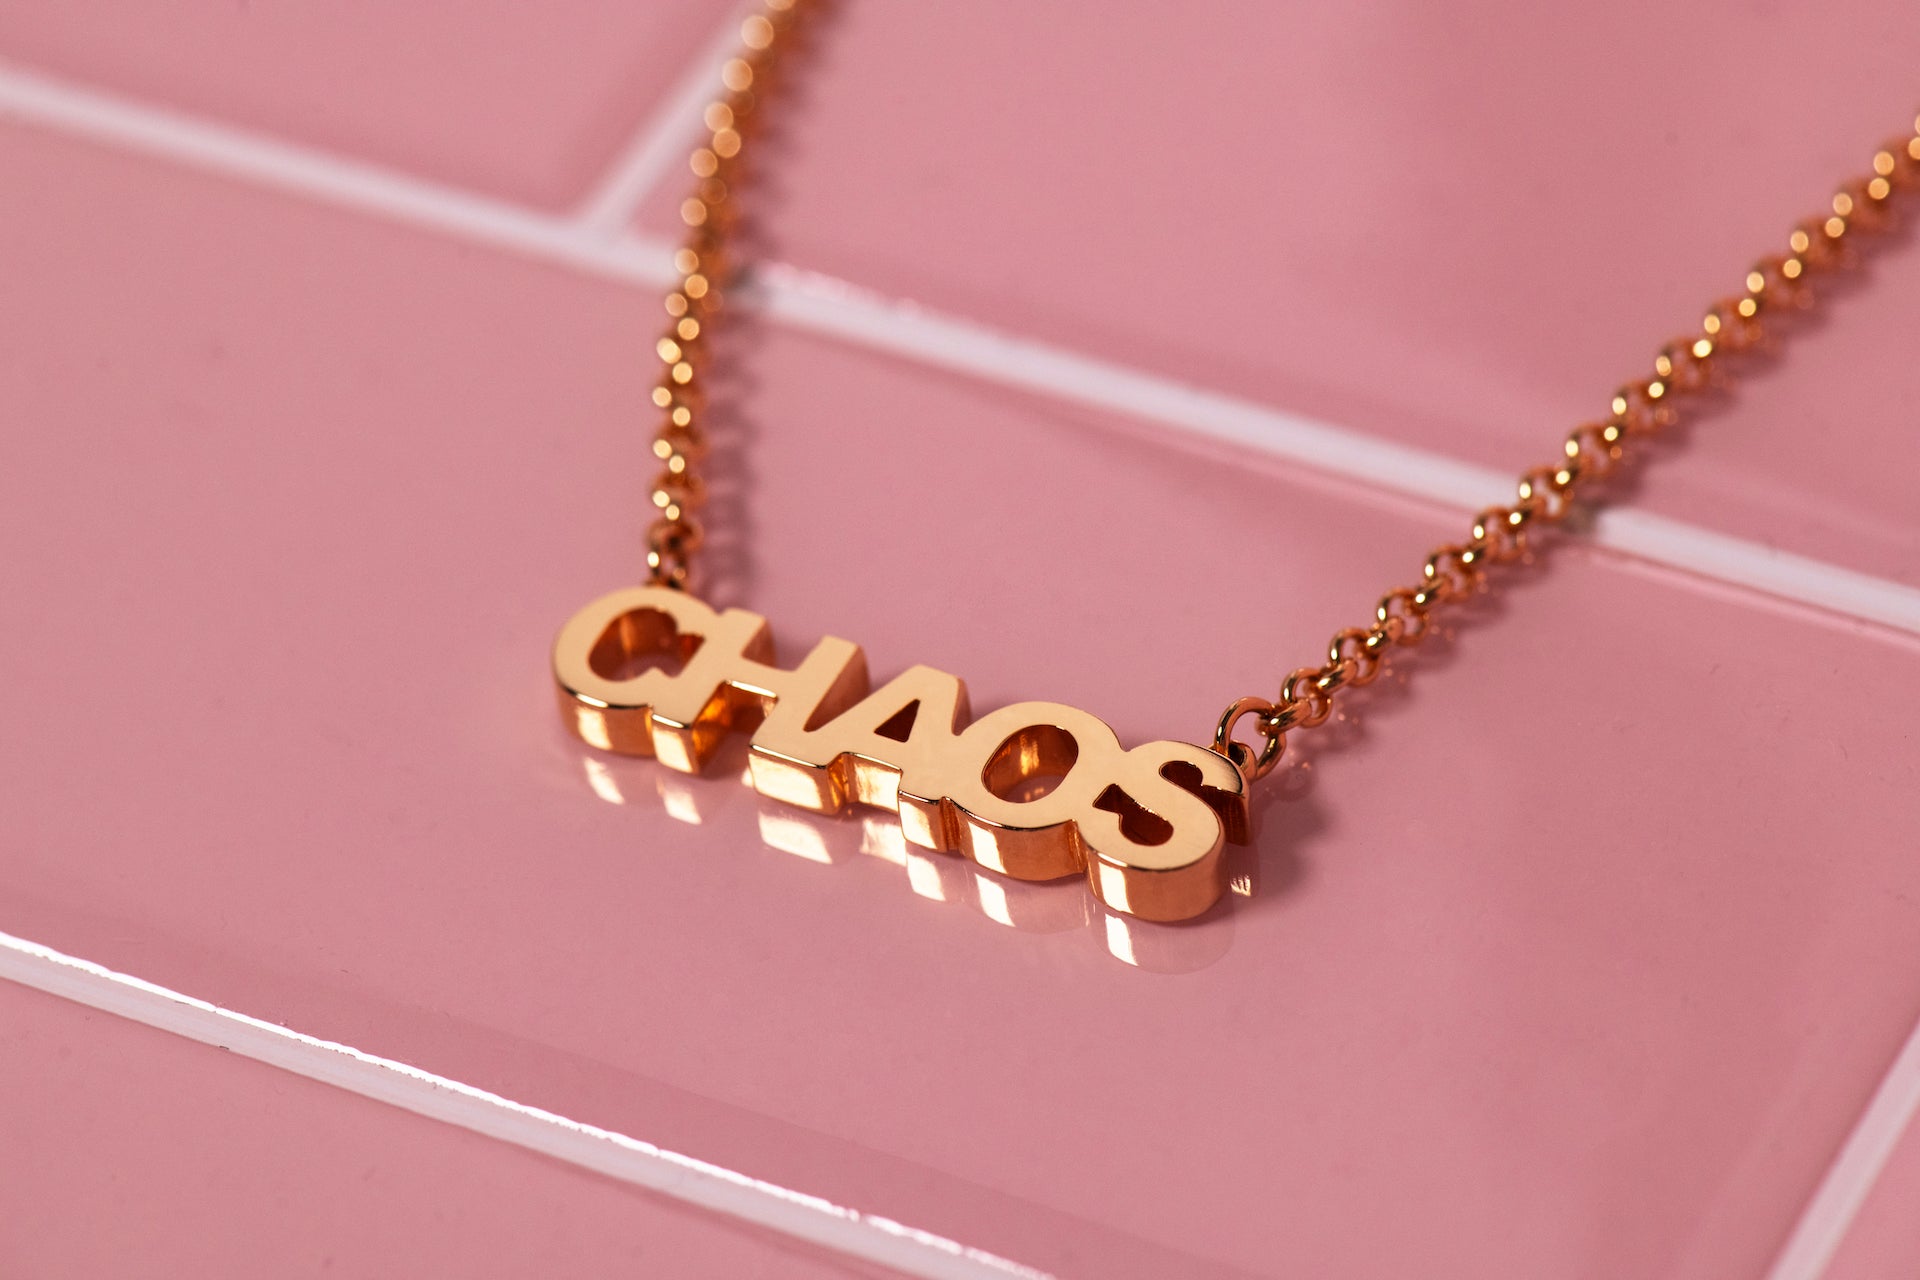 CHAOS NECKLACE